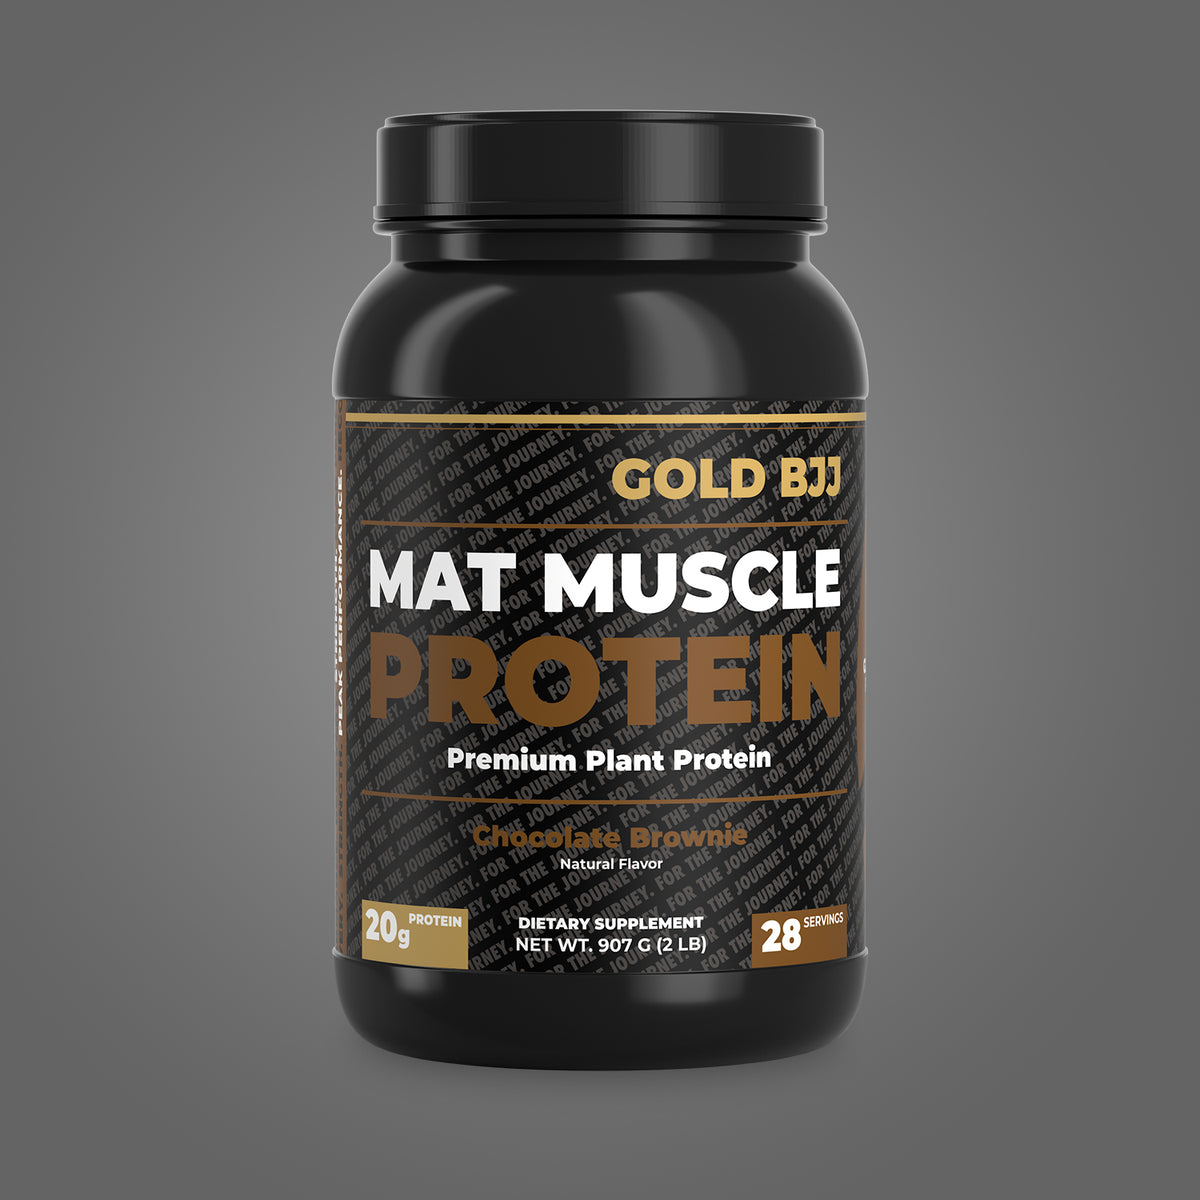 Mat Muscle Protein Powder